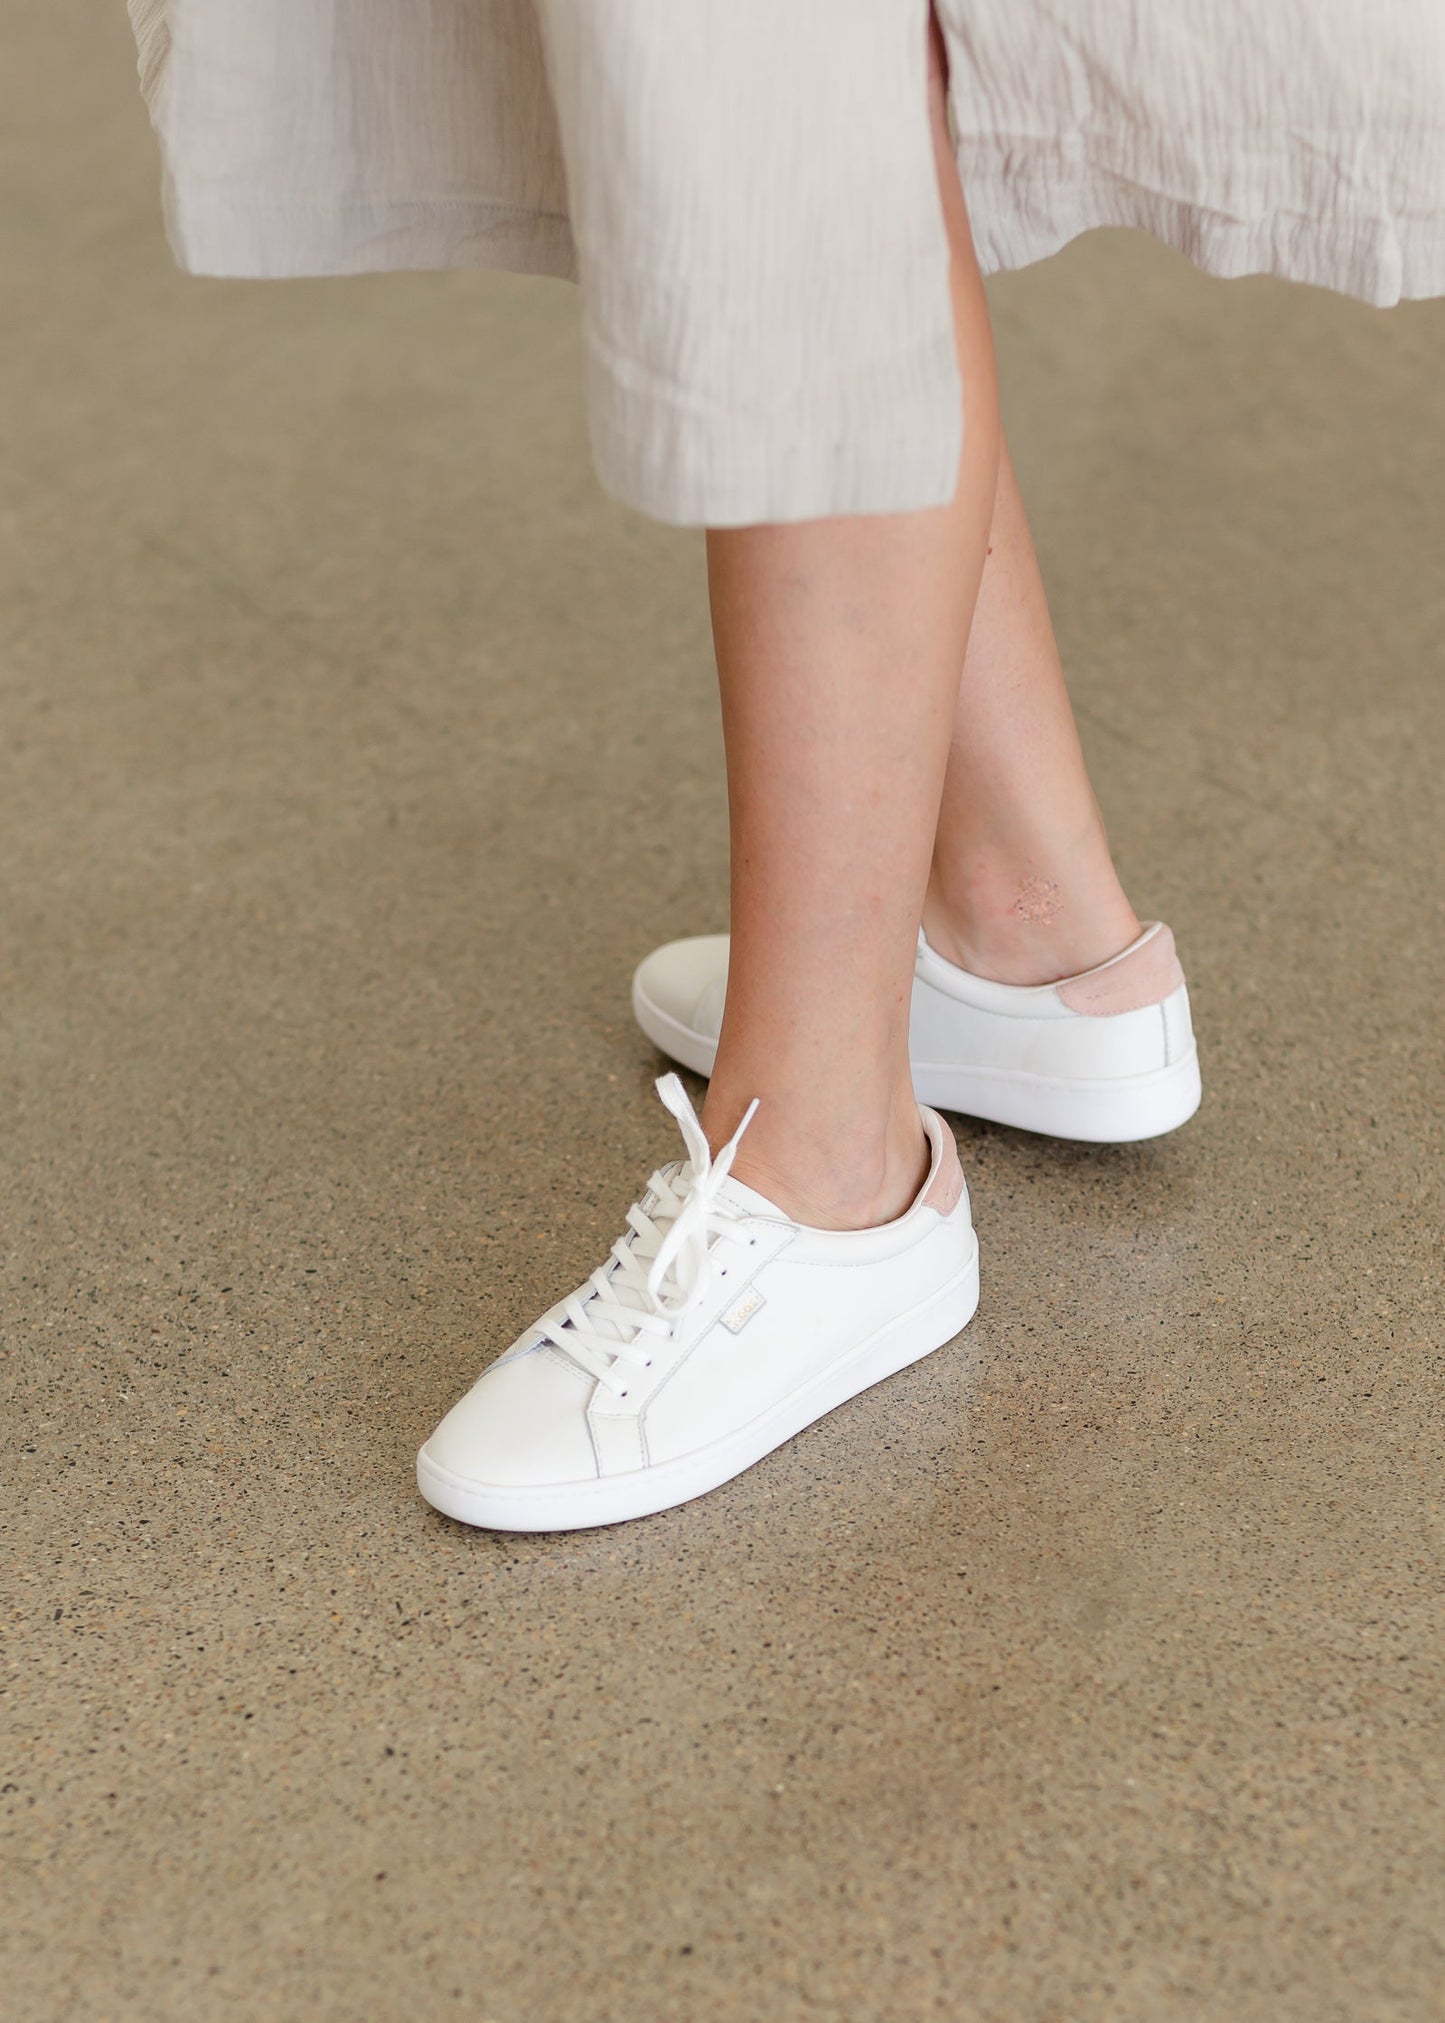 Keds White + Blush Leather Sneaker - FINAL SALE Accessories